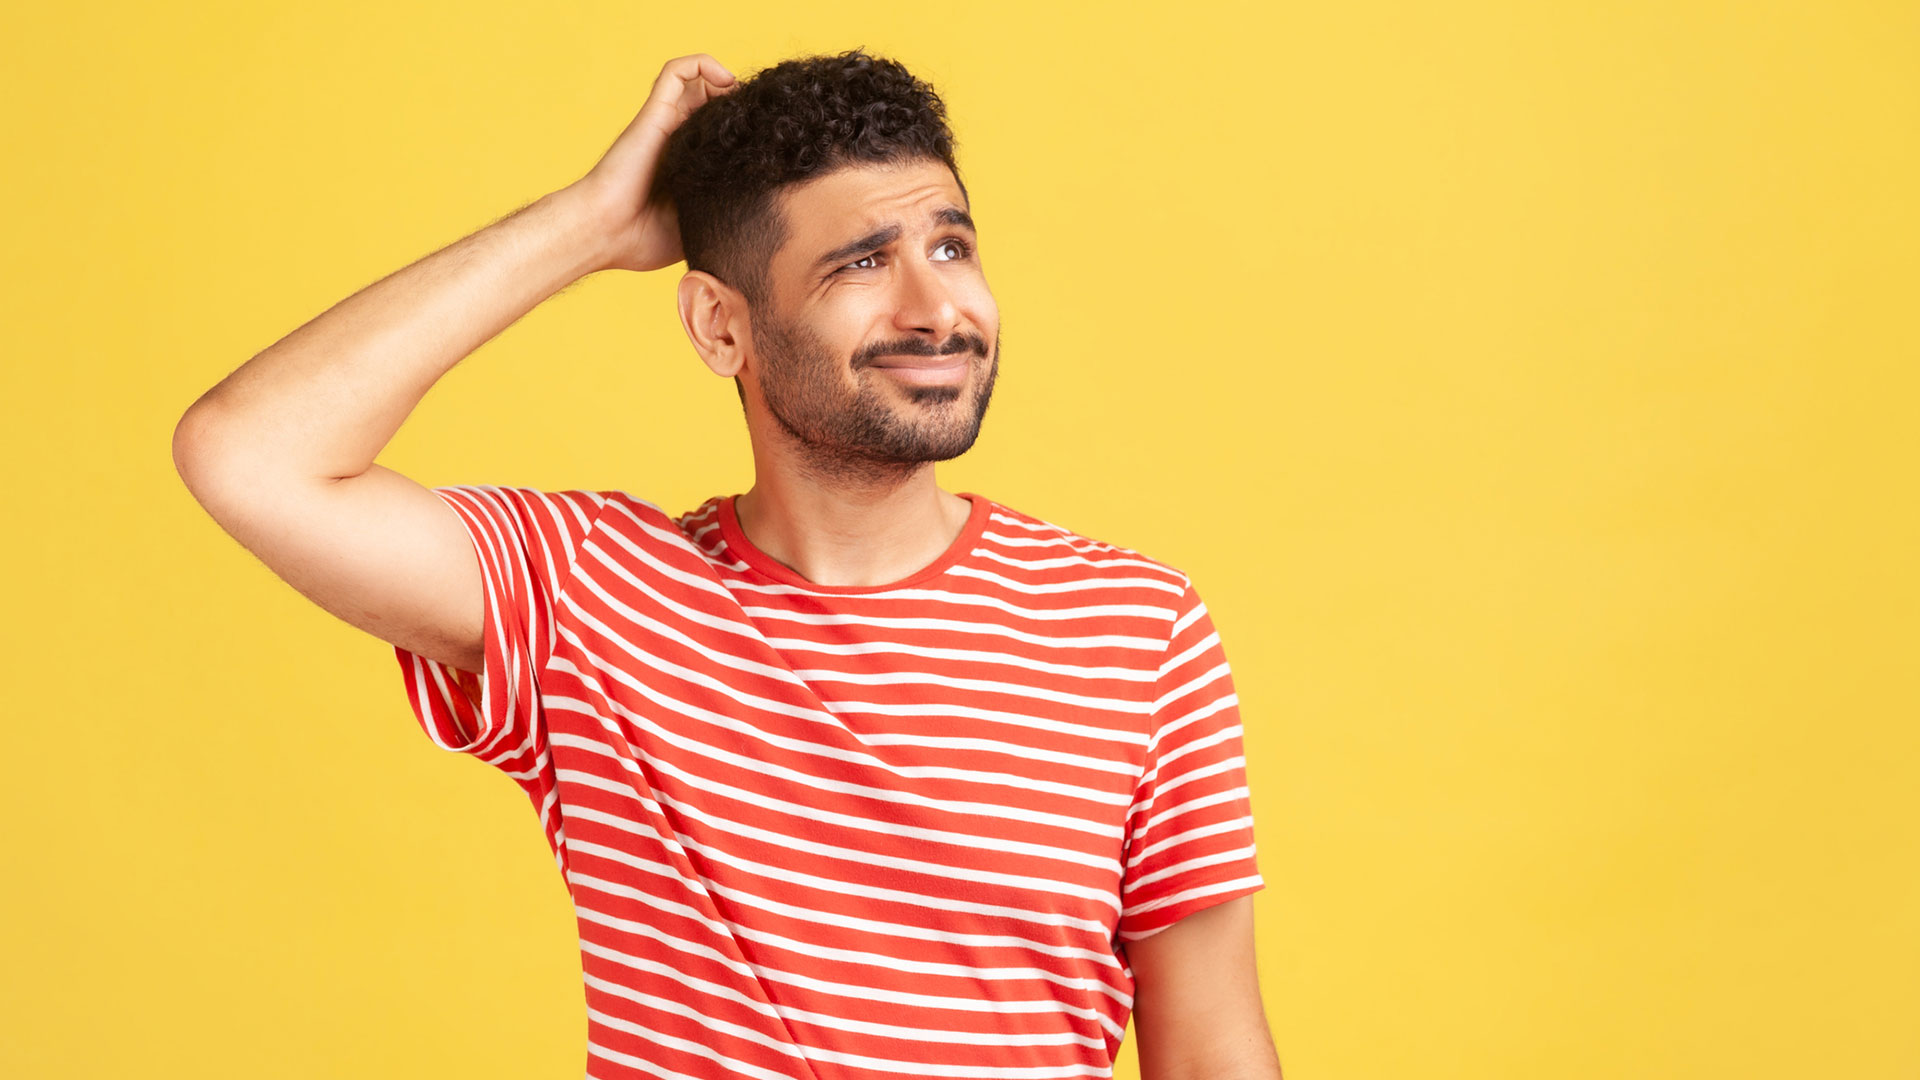 Confused uncertain man with beard in red striped t-shirt scratching his head, choosing, trying to make right decision, dilemma. Indoor studio shot isolated on yellow background